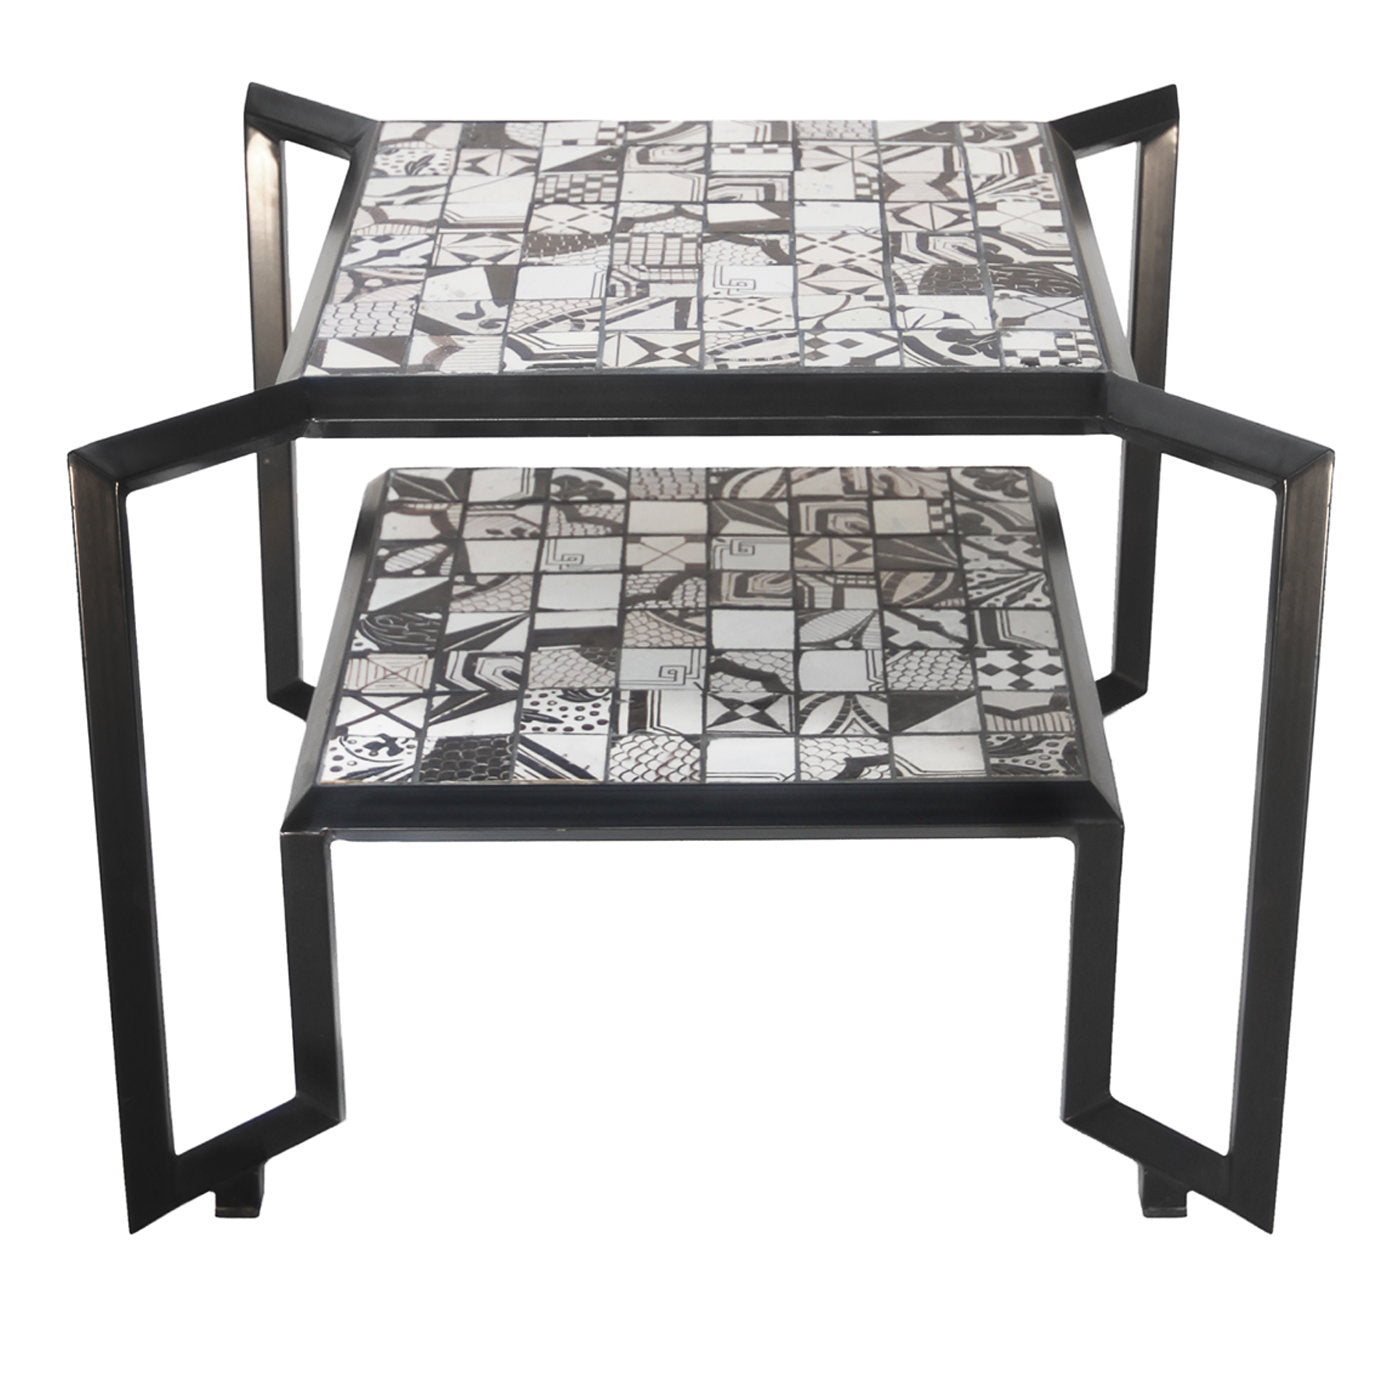 Black and White Spider Mosaic Tile Table - Main view